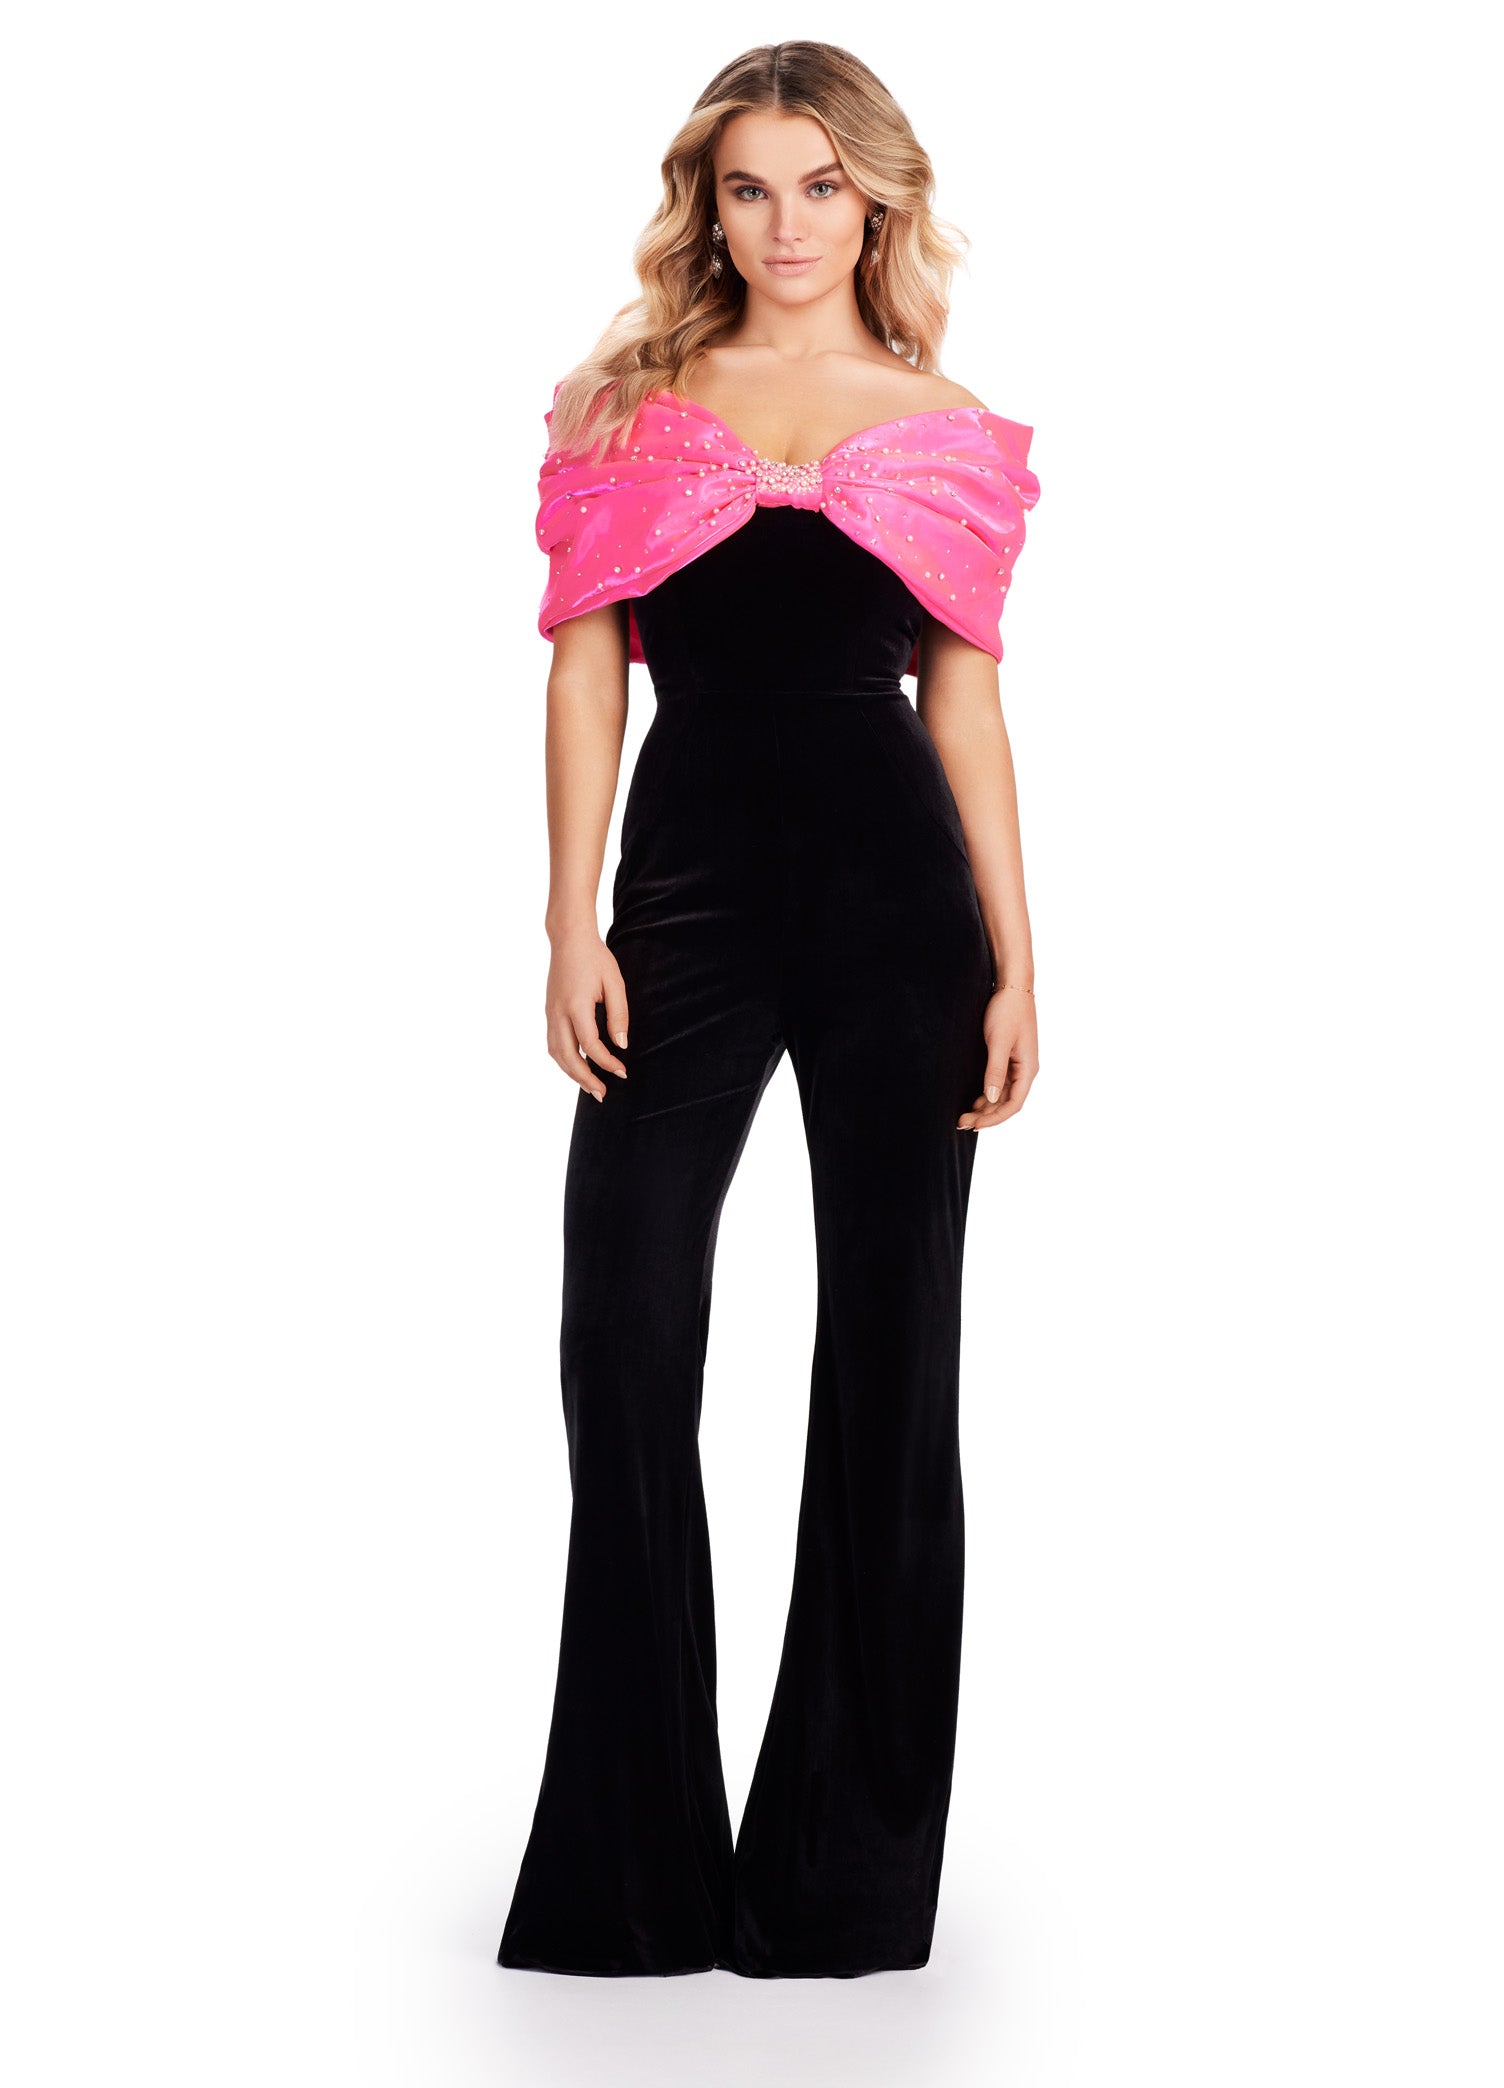 The Ashley Lauren 11535 Prom Jumpsuit combines luxurious velvet with an off-shoulder design for a sophisticated and stylish look. The oversized satin bow adds a touch of elegance, making it perfect for formal events. Its strapless design ensures comfort without sacrificing style. The jumpsuit of our dreams! This strapless velvet jumpsuit features a fabulous oversized satin bow. Perfect for your next event!